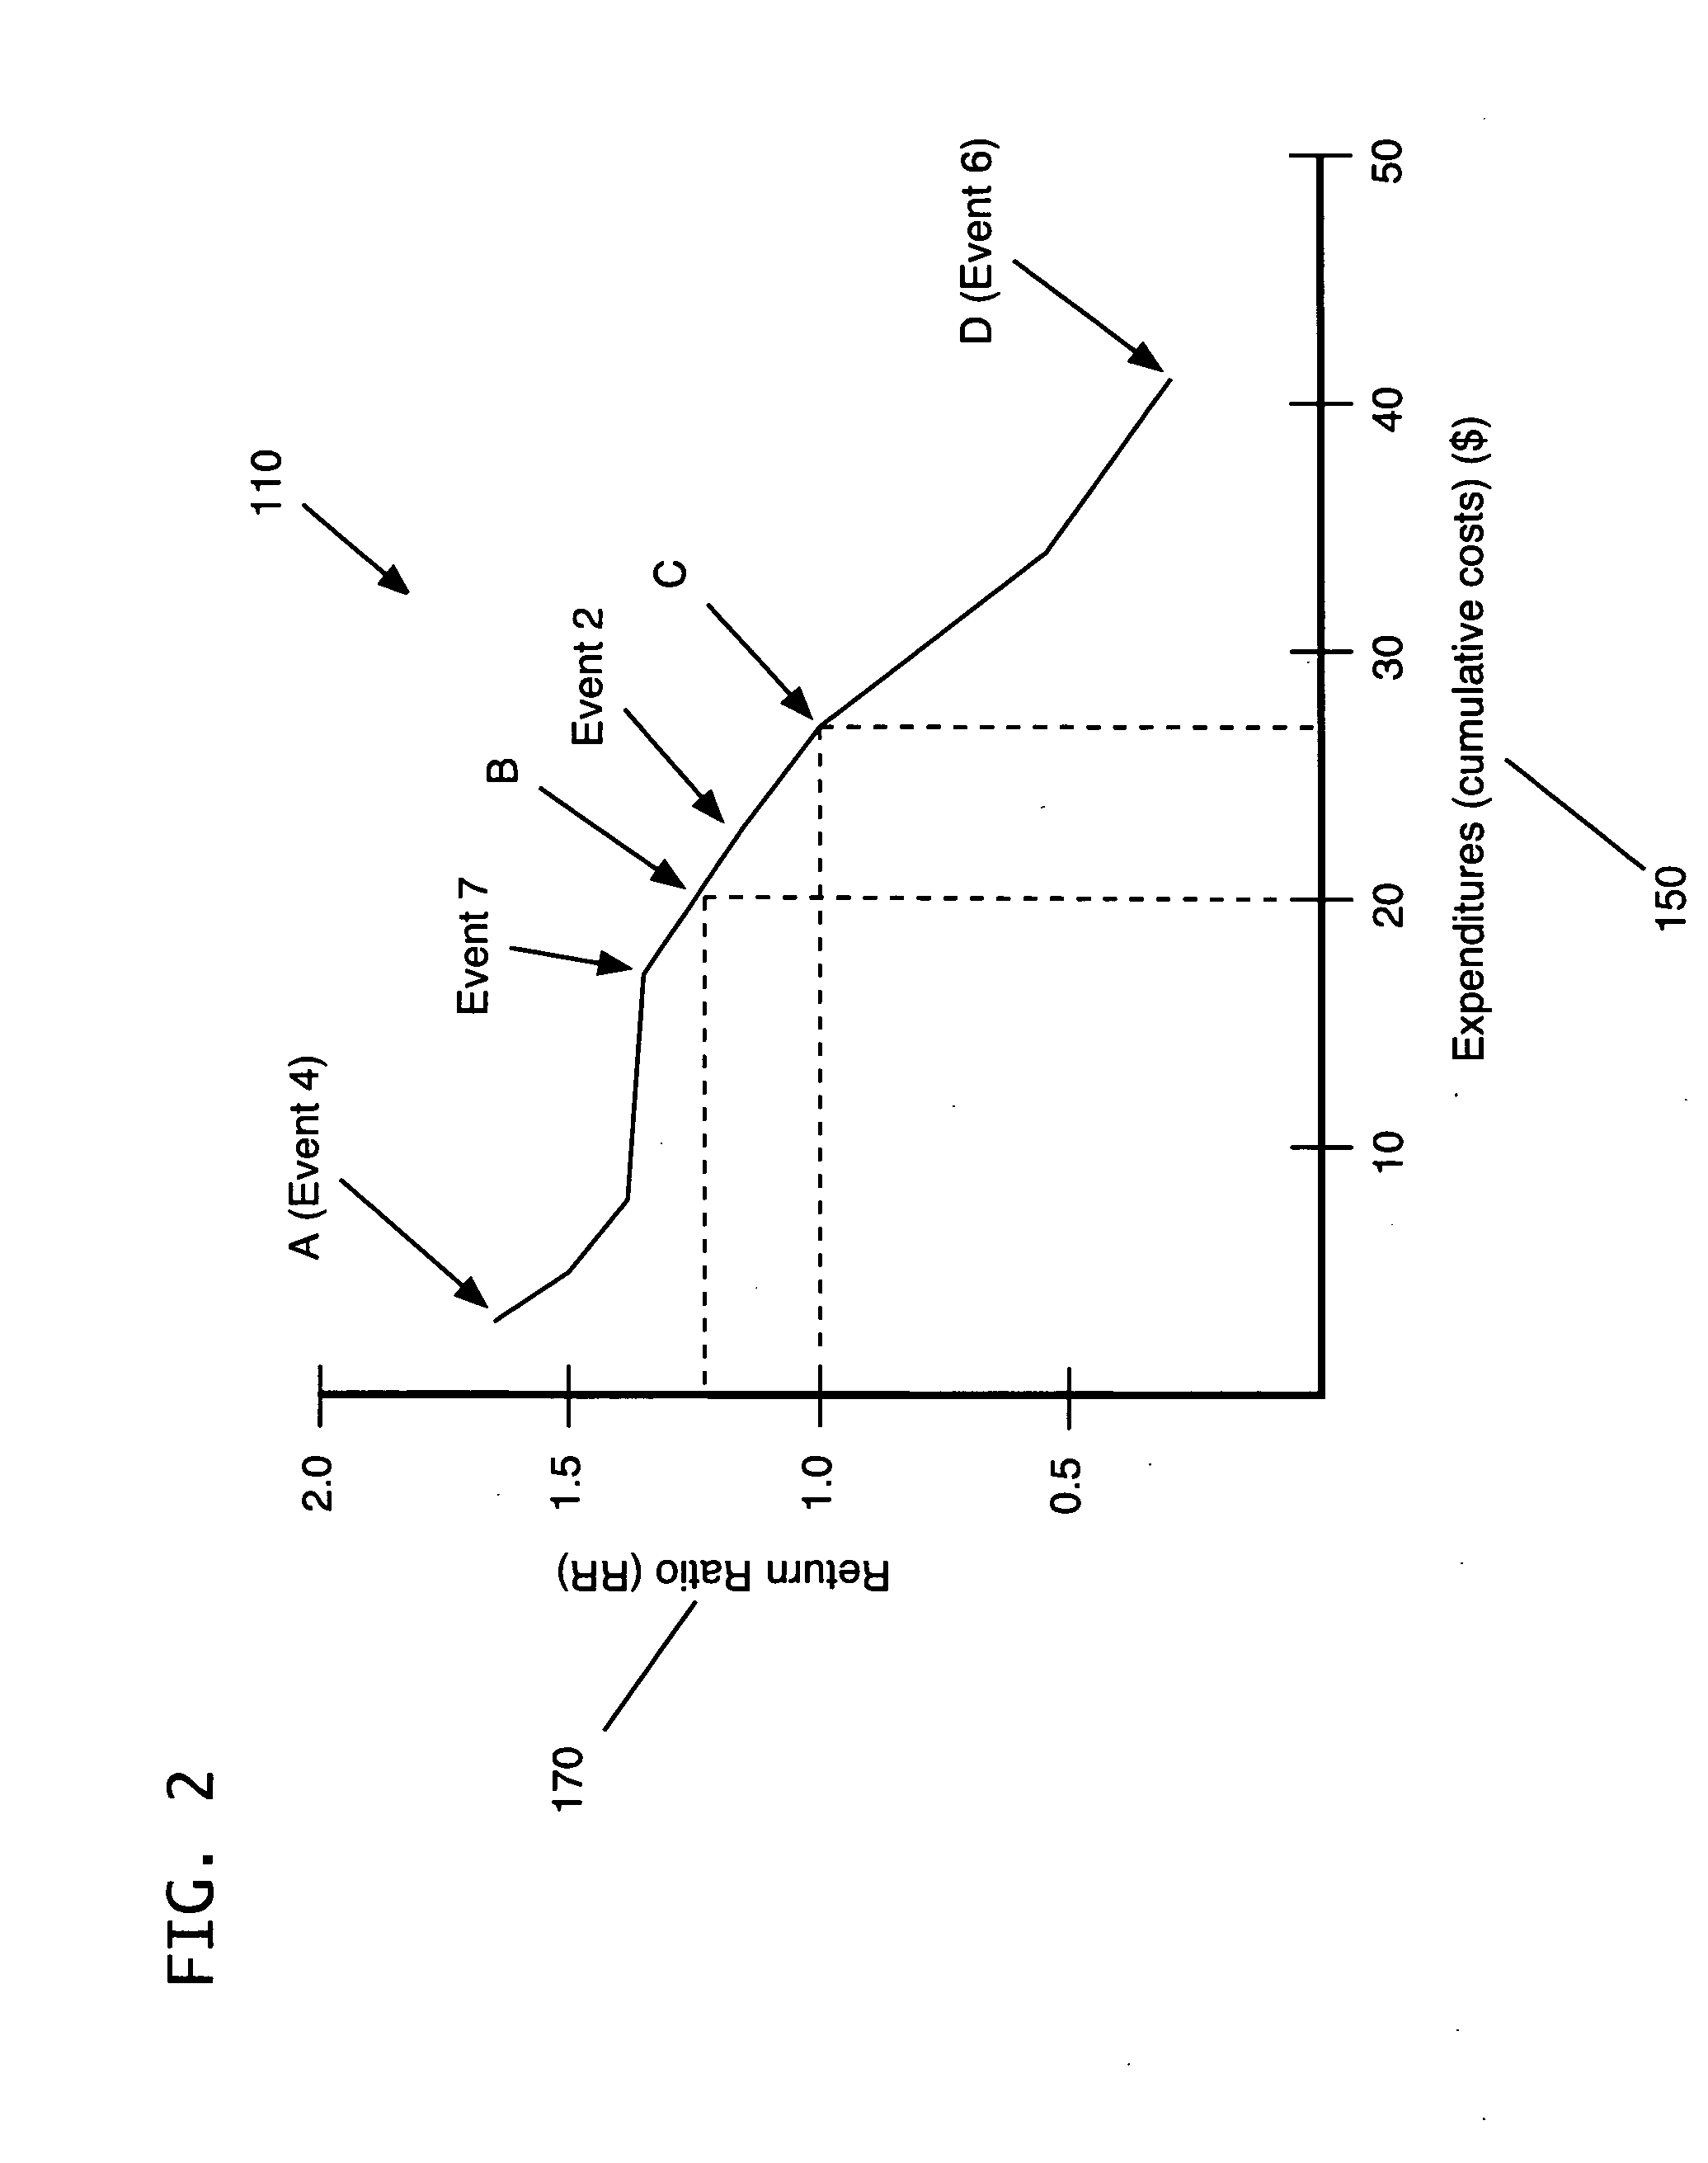 Method, system, and program product for graphically representing a marketing optimization